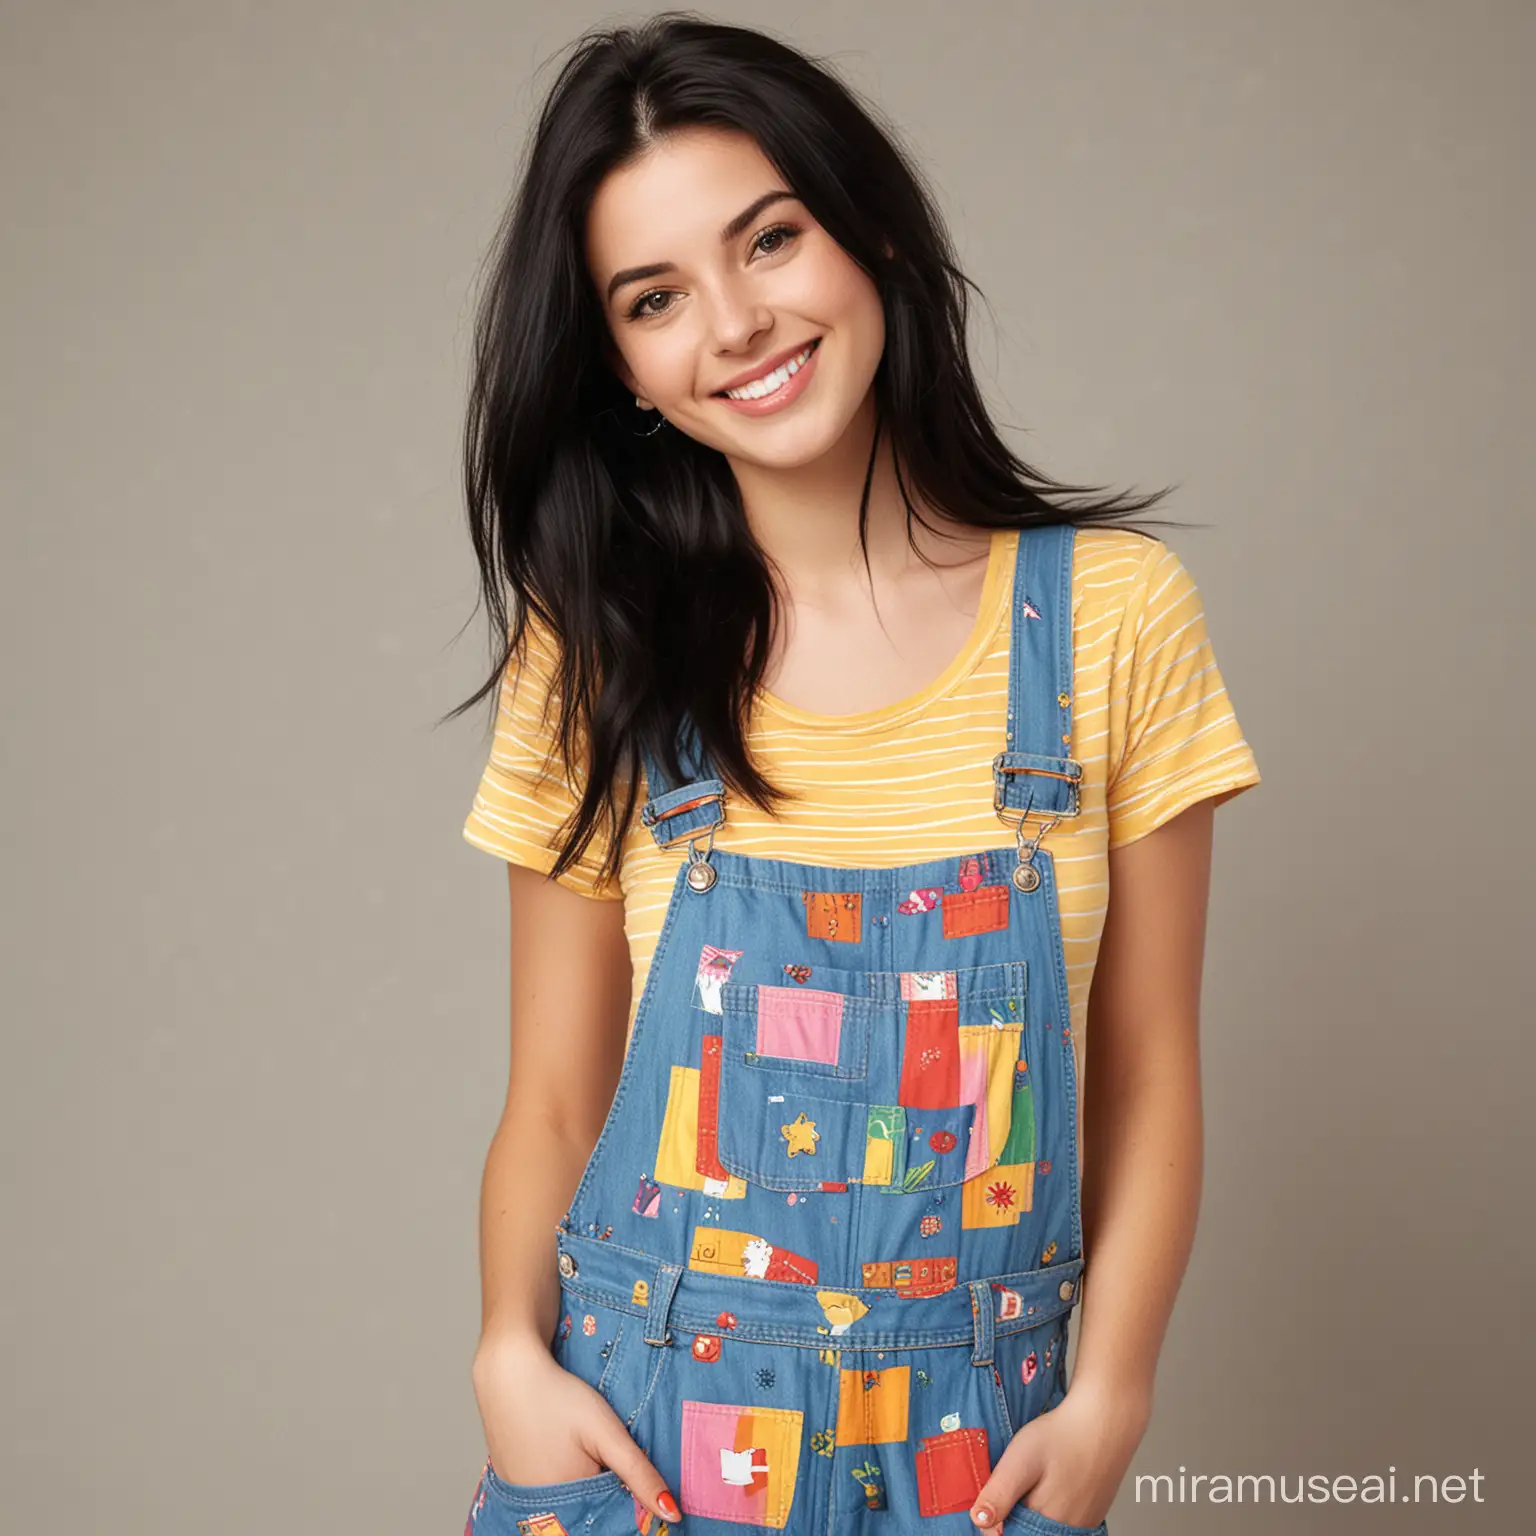 Cheerful Young Woman in Colorful Overalls Smiling